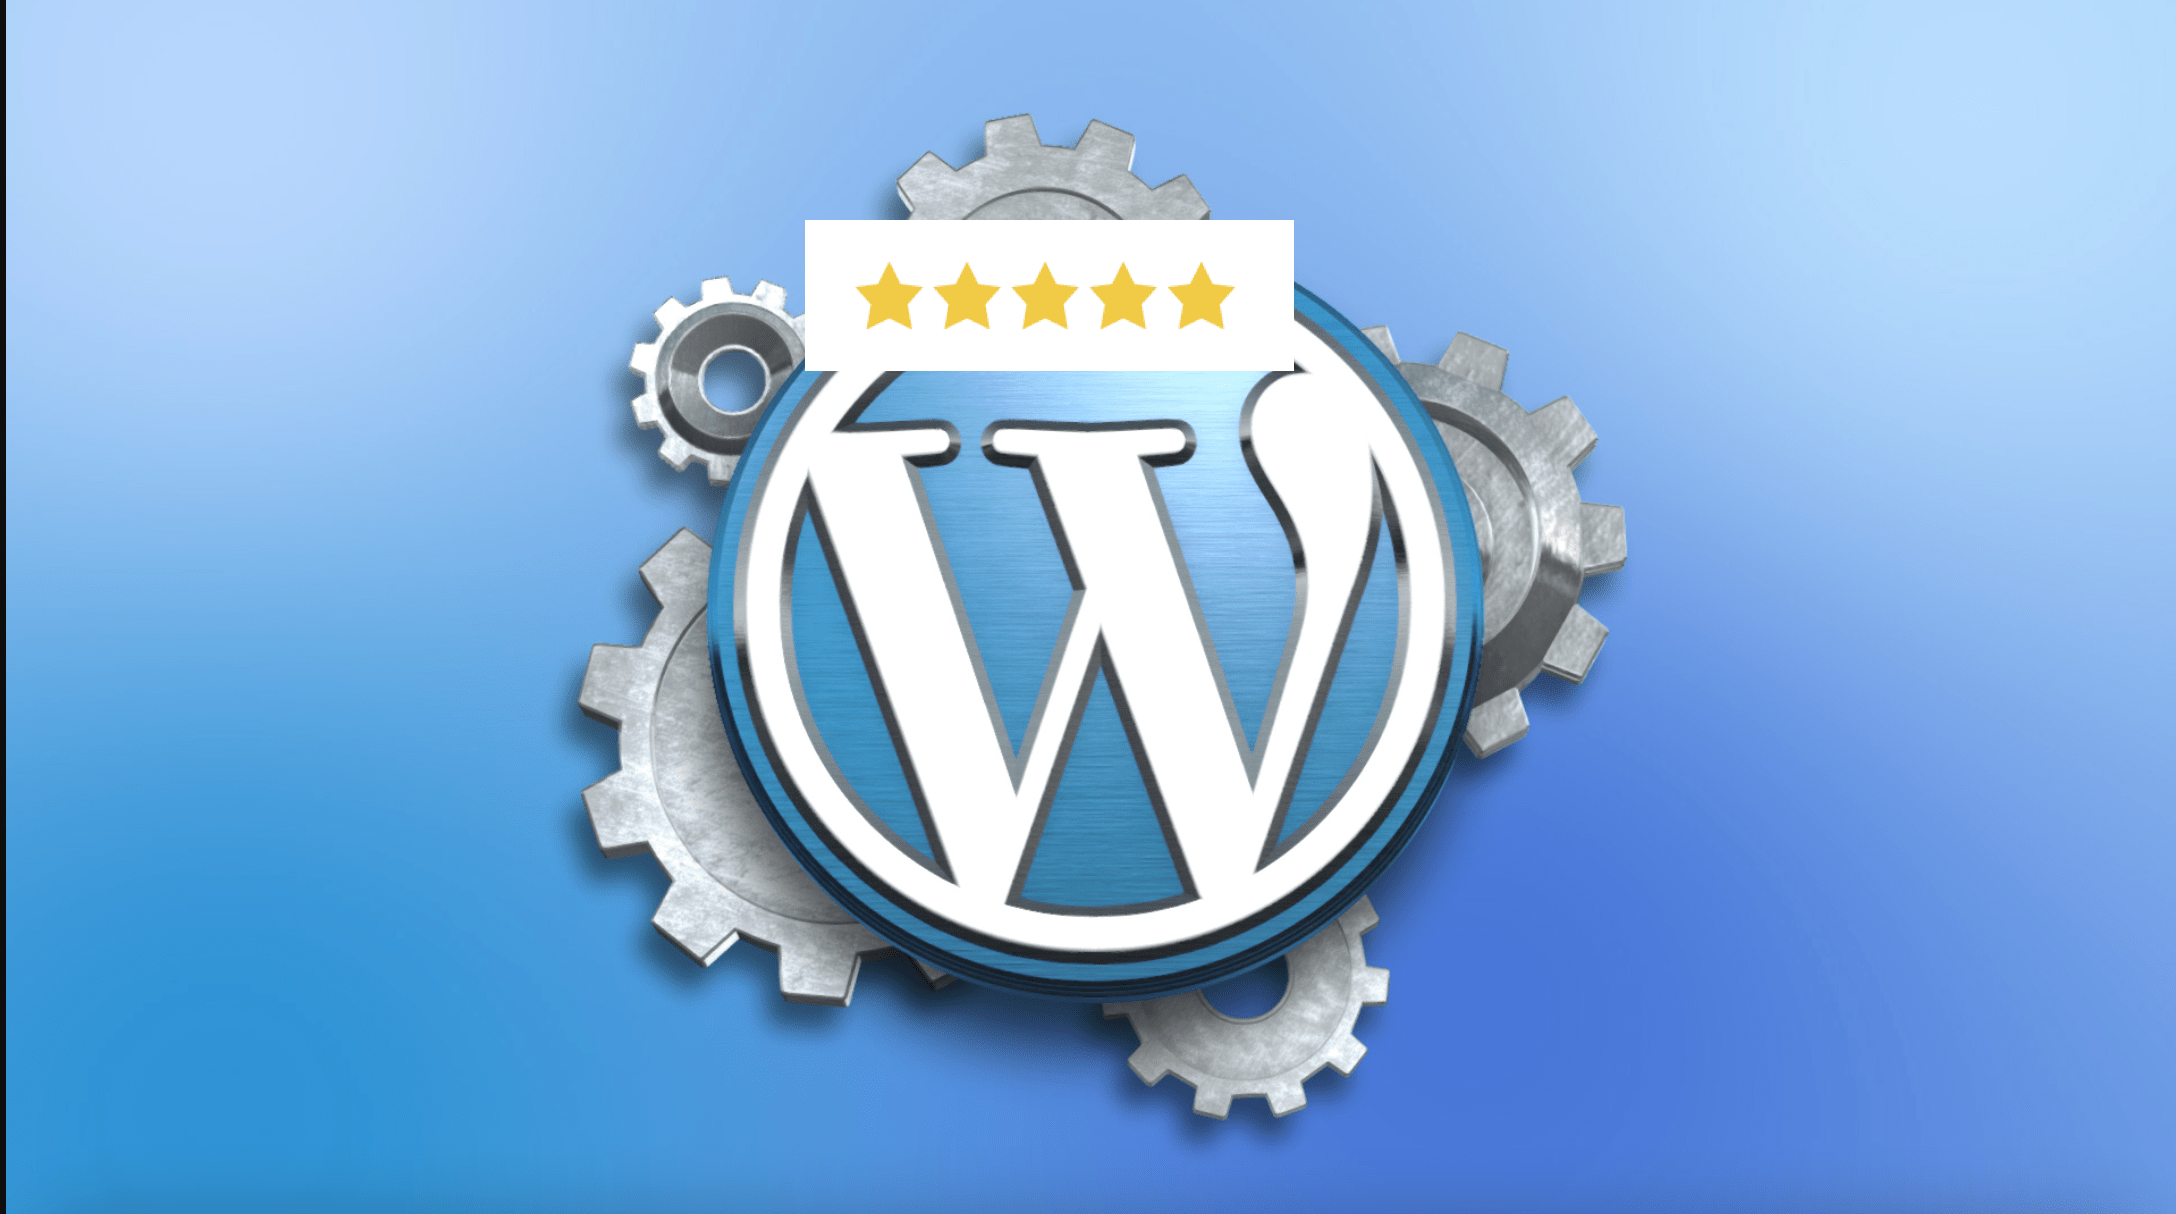 How to migrate GD star rating to YASR plugin in WordPress